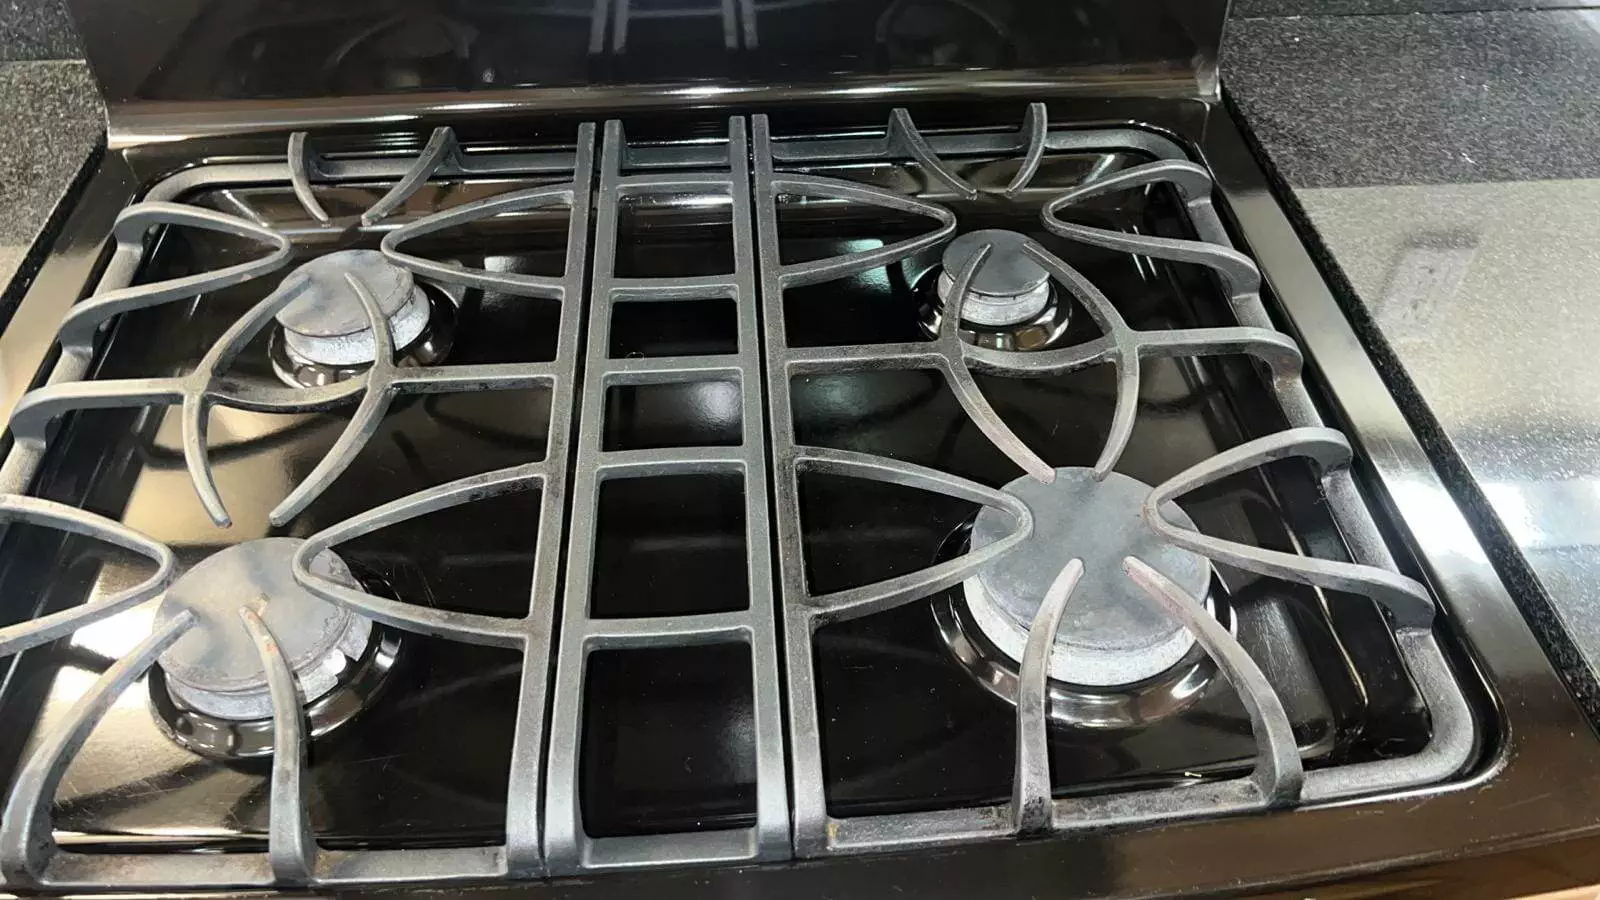 A stove top with four burners, needing a move-out clean in the kitchen.